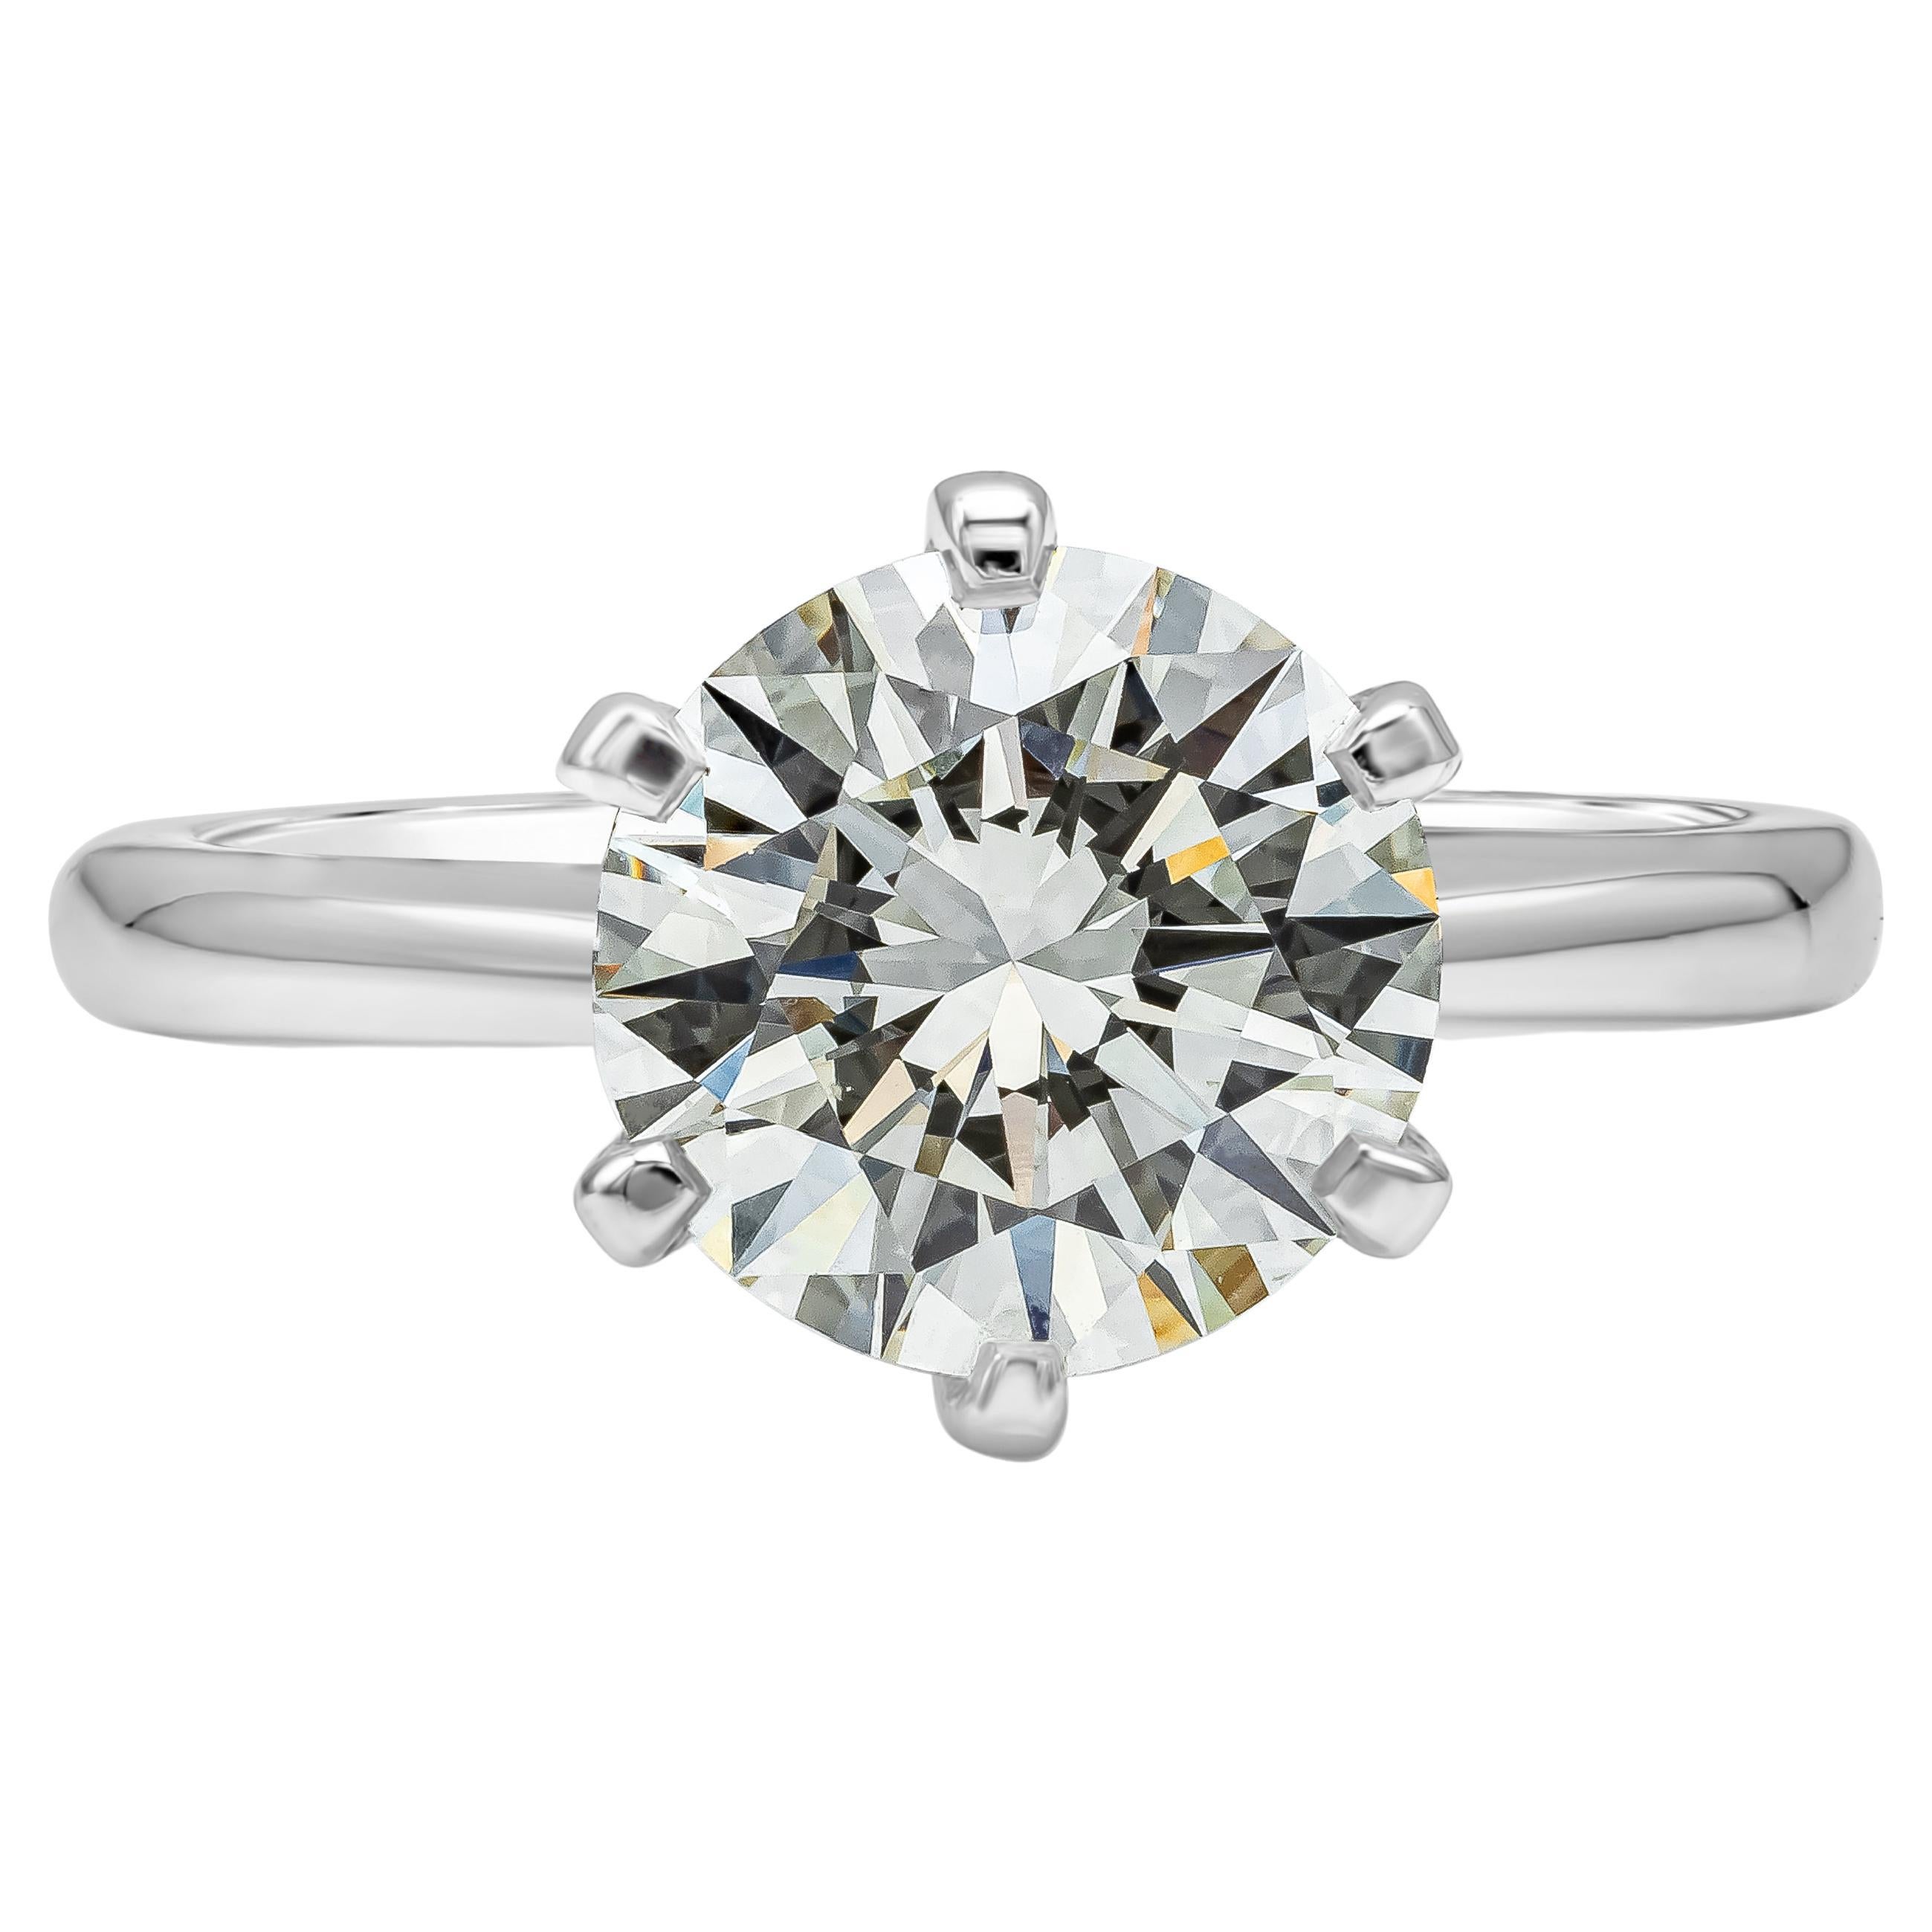 GIA Certified 2.51 Carat Round Diamond Solitaire Engagement Ring